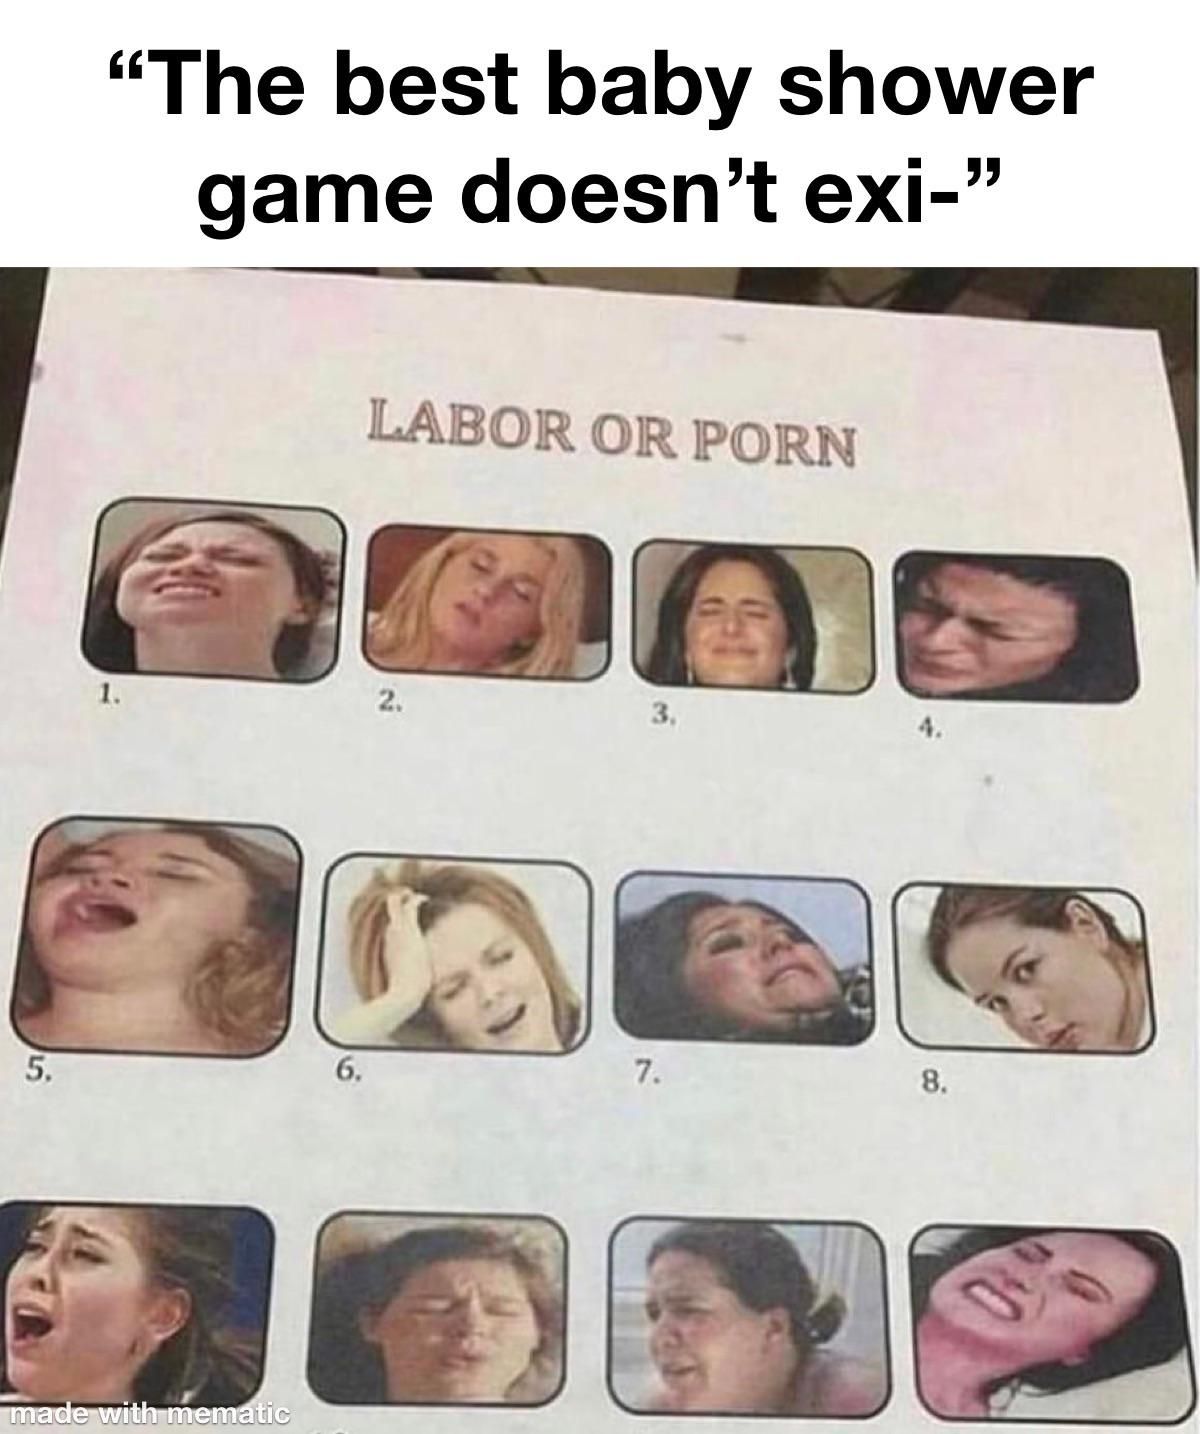 This is an actual baby shower game, but anyways what are your answers?